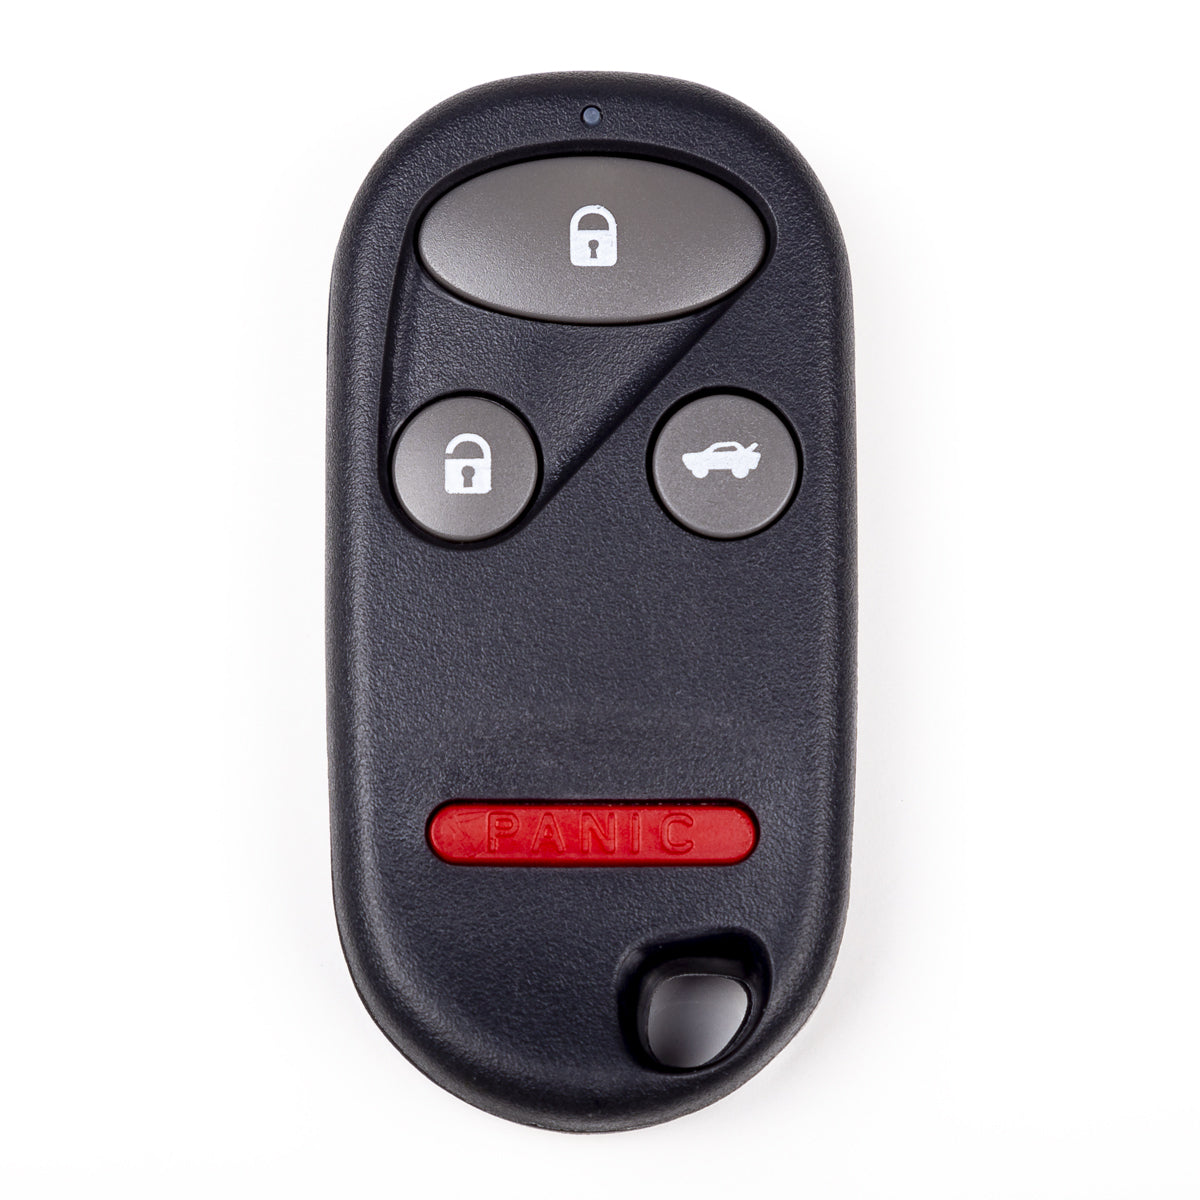 2003 Acura TL Keyless Entry 4 Buttons FCC# KOBUTAH2T